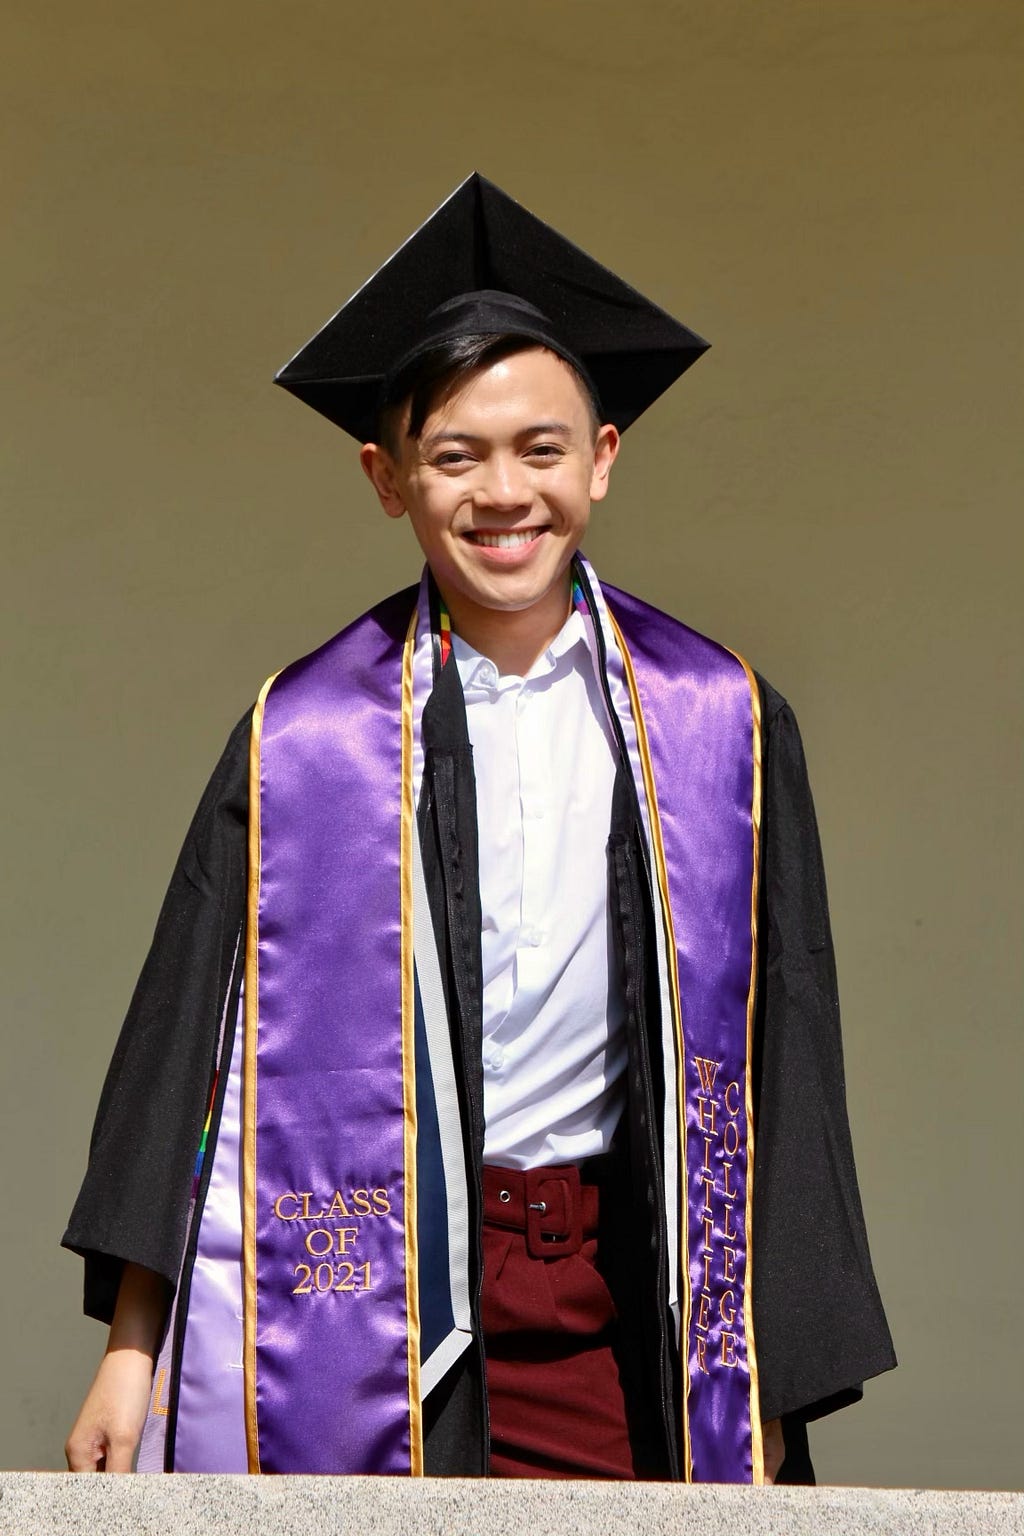 Gabriel Gorospe in his cap and gown.